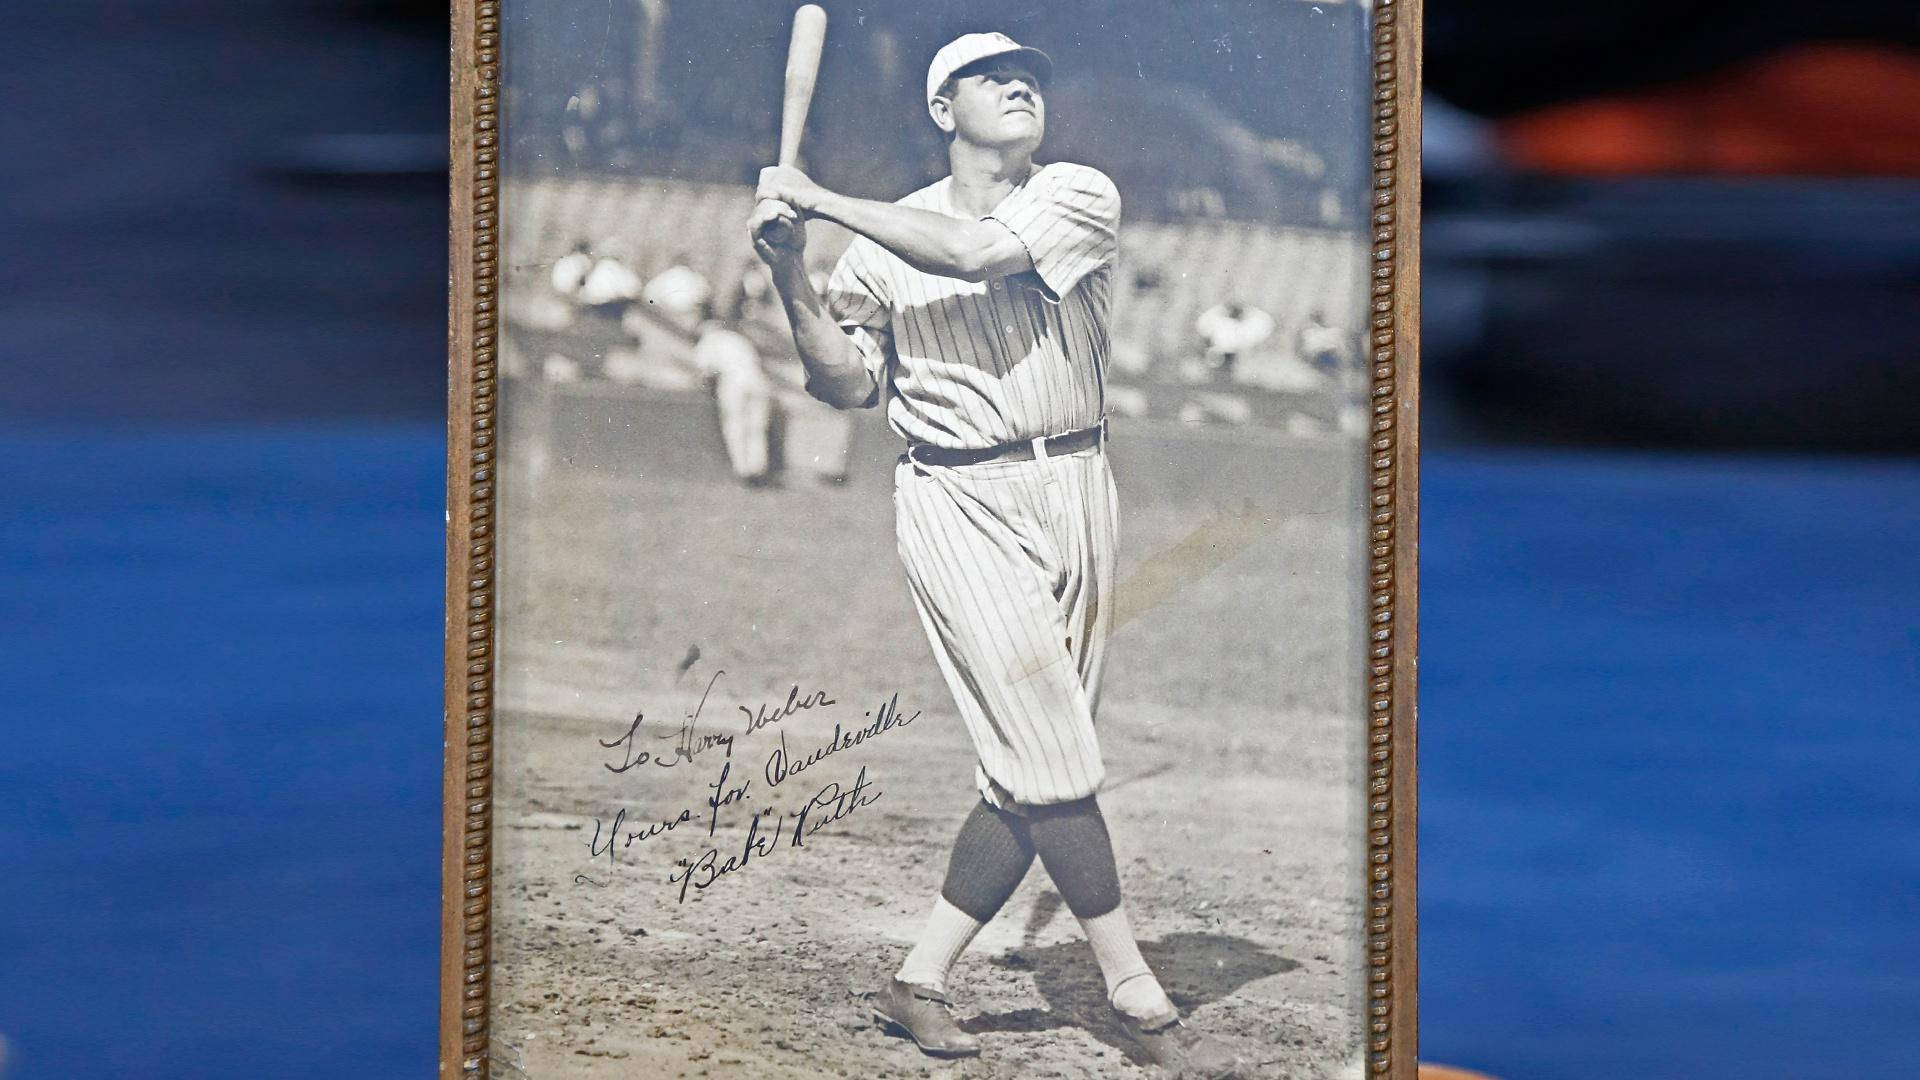 Babe Ruth Portrait With Signature Wallpaper